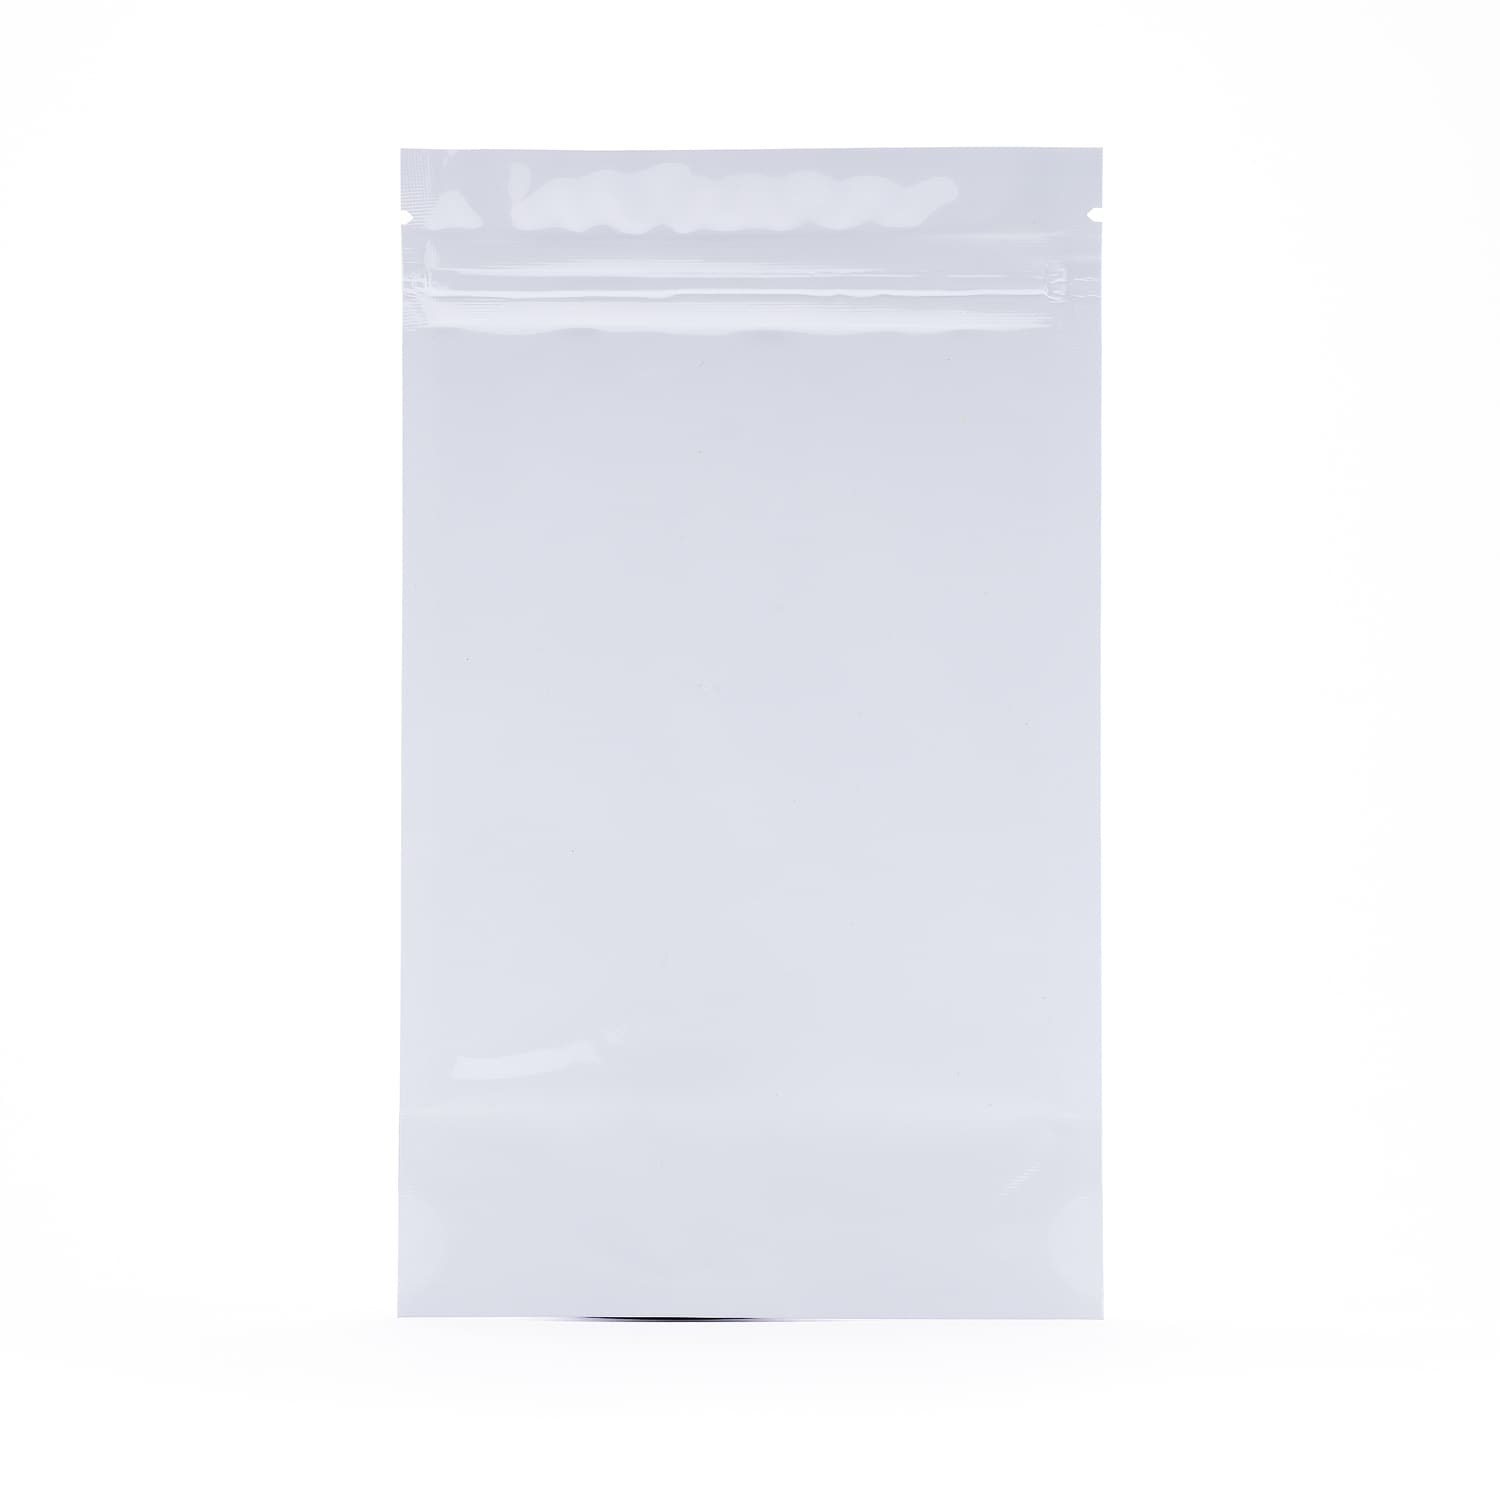 1/4 Mylar Barrier Bag White/Clear - 7 Grams (100 Count) - SupplyCo